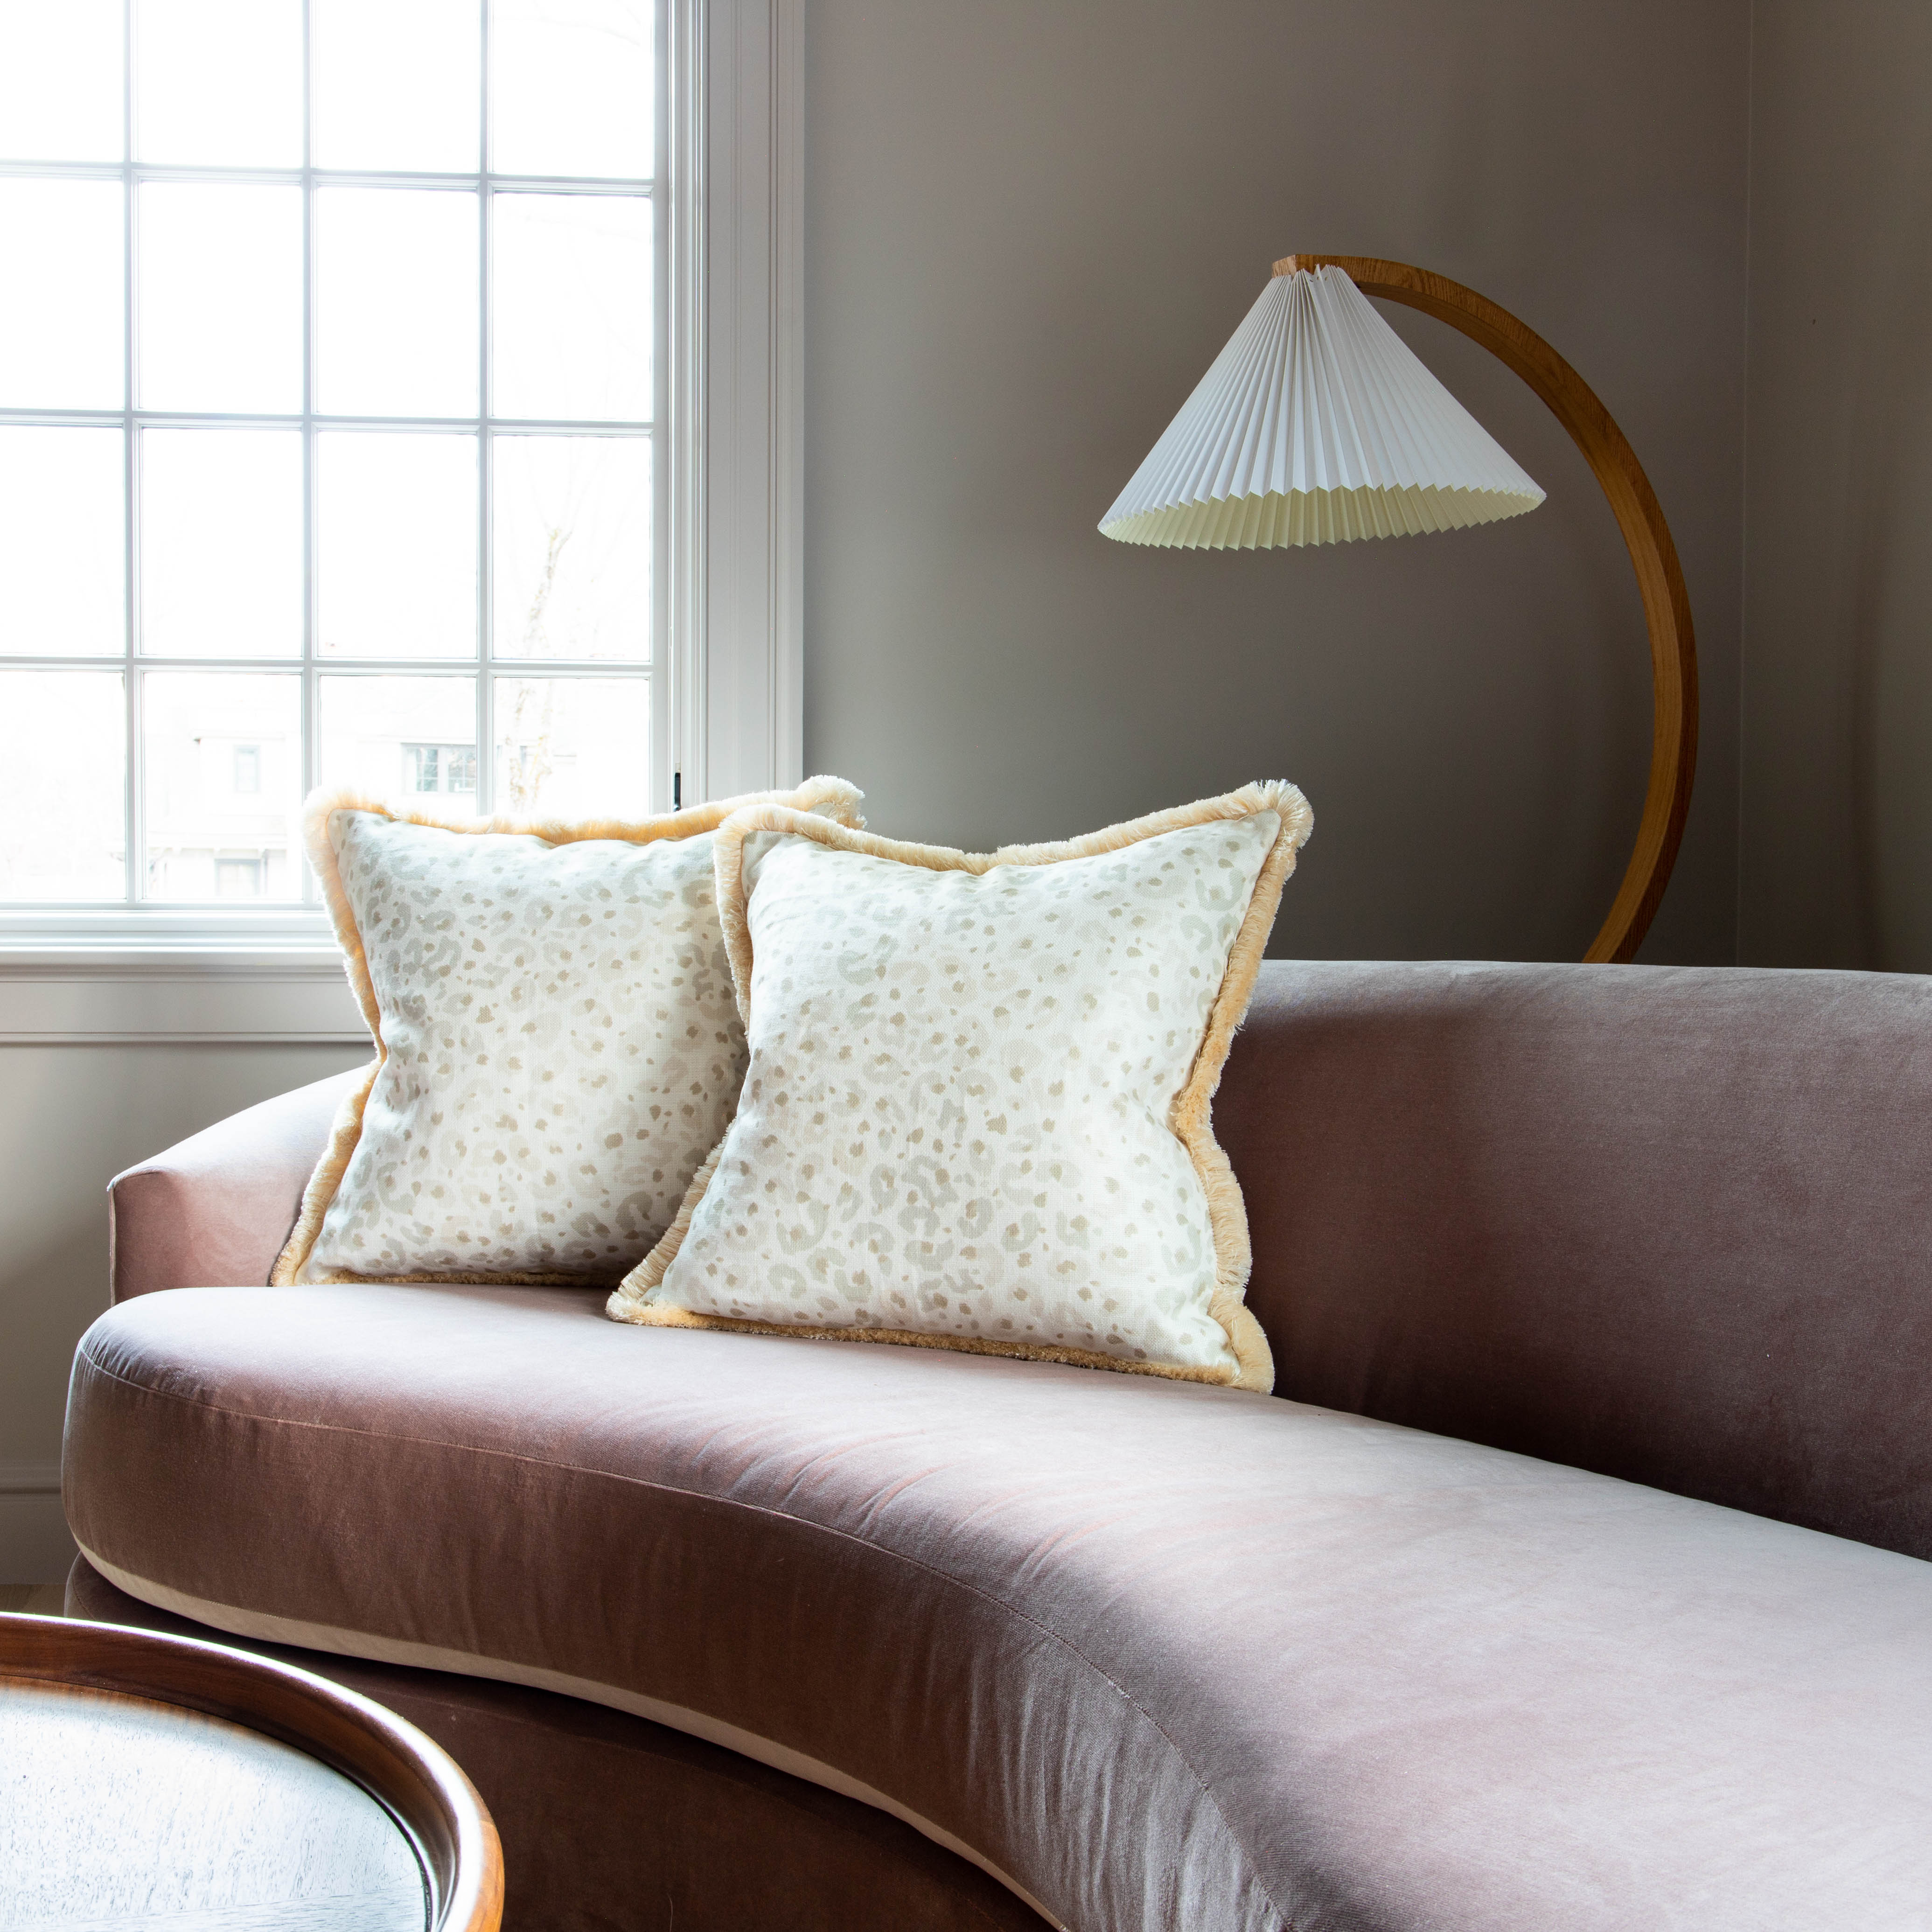 Long Pink Velvet Couch Close-up styled with two Beige Animal Print Pillows by illuminated window and curved wooden lamp